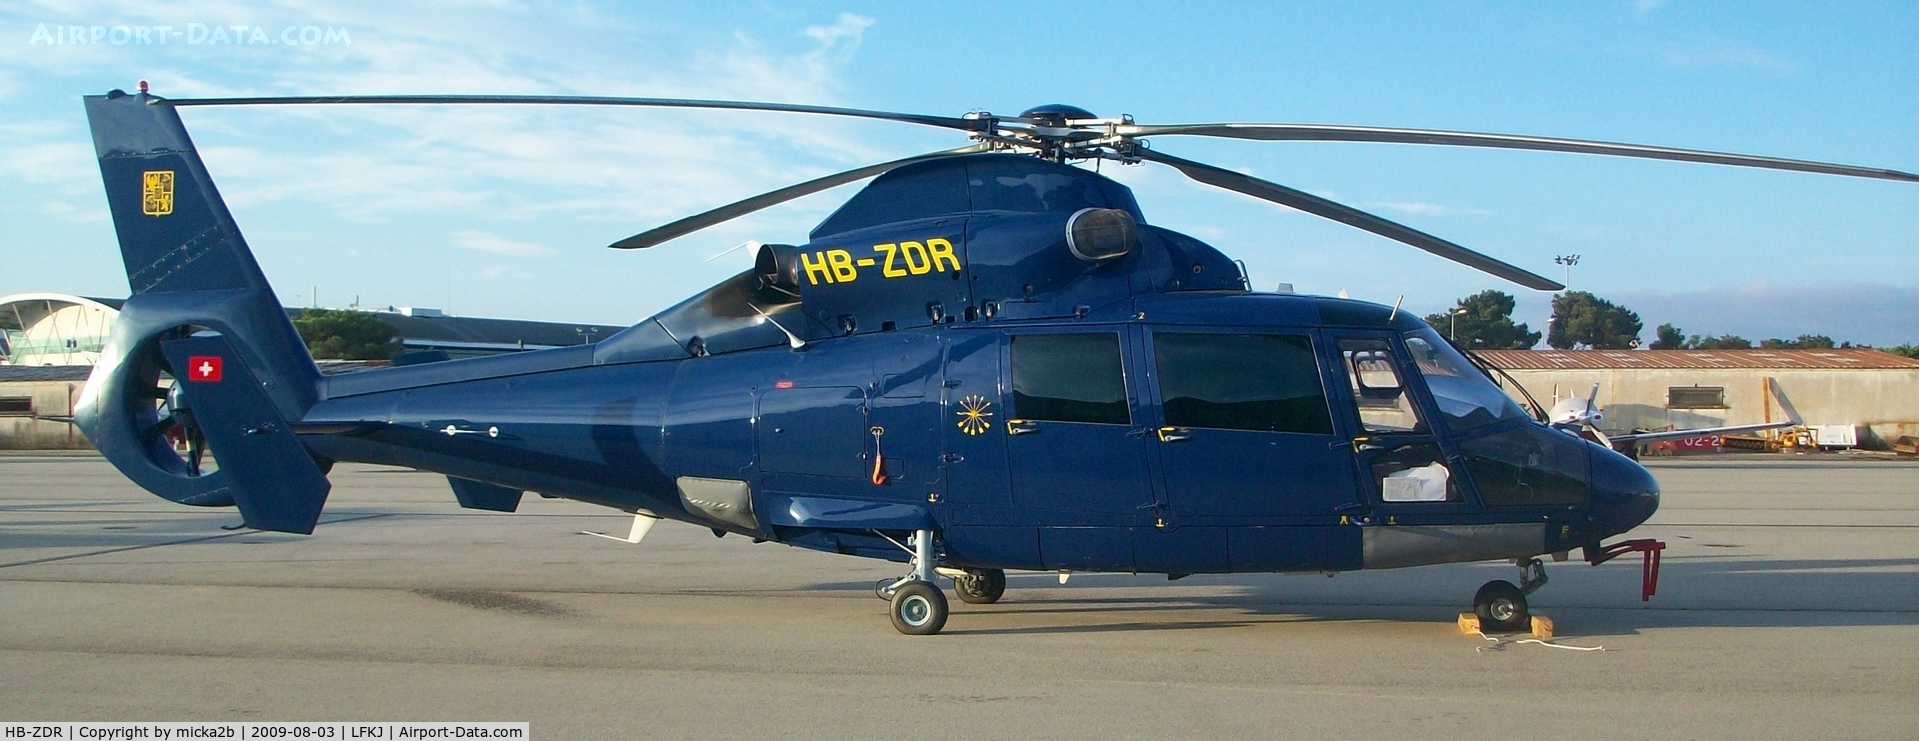 HB-ZDR, 2001 Eurocopter AS-365N-3 Dauphin 2 C/N 6584, Parked